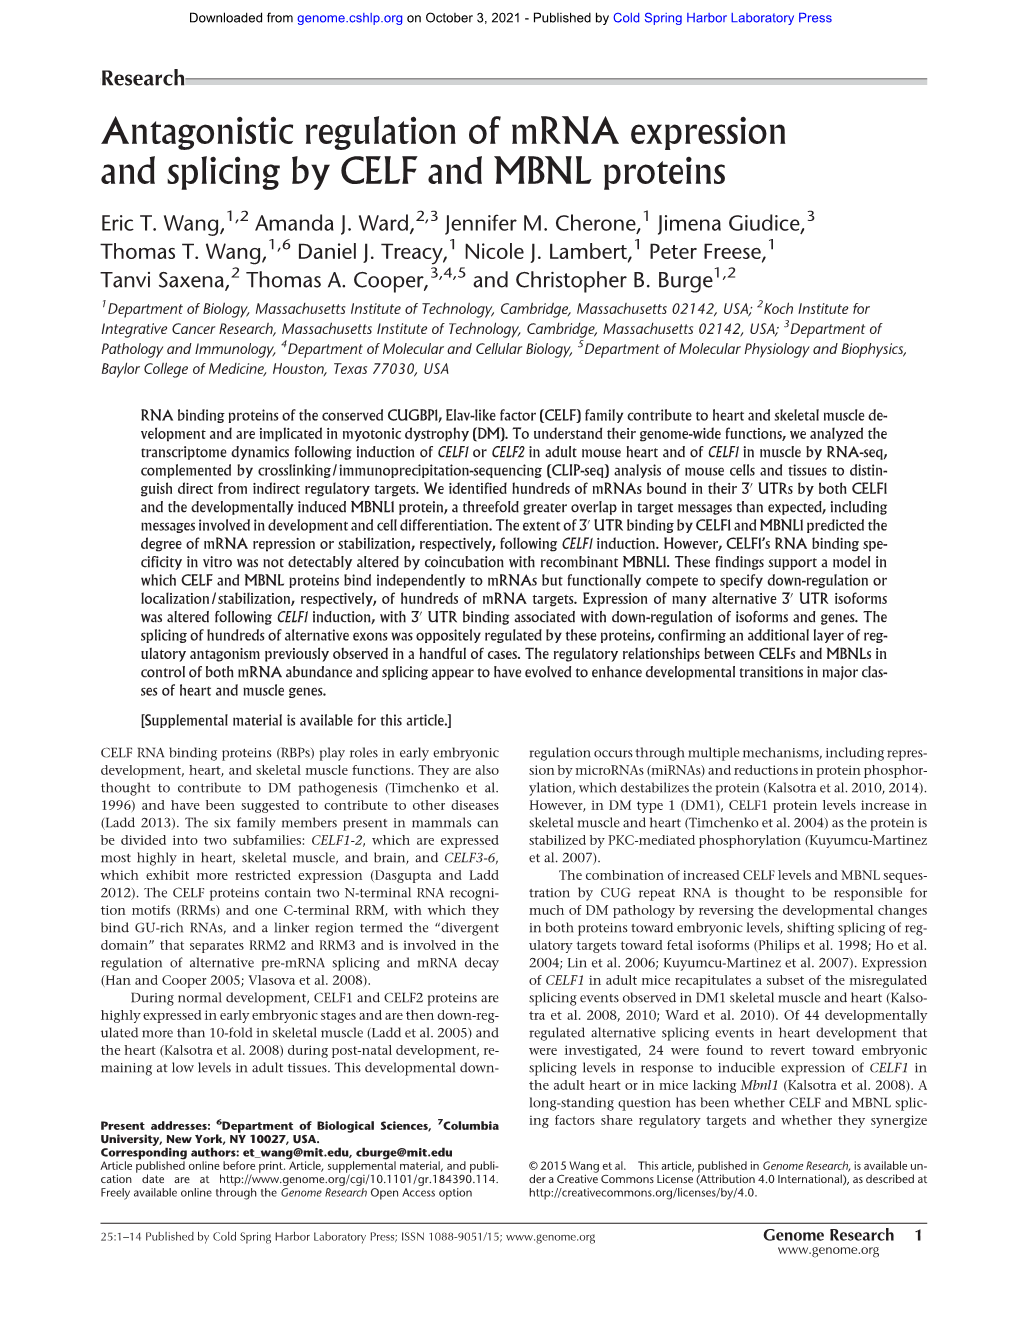 Antagonistic Regulation of Mrna Expression and Splicing by CELF and MBNL Proteins